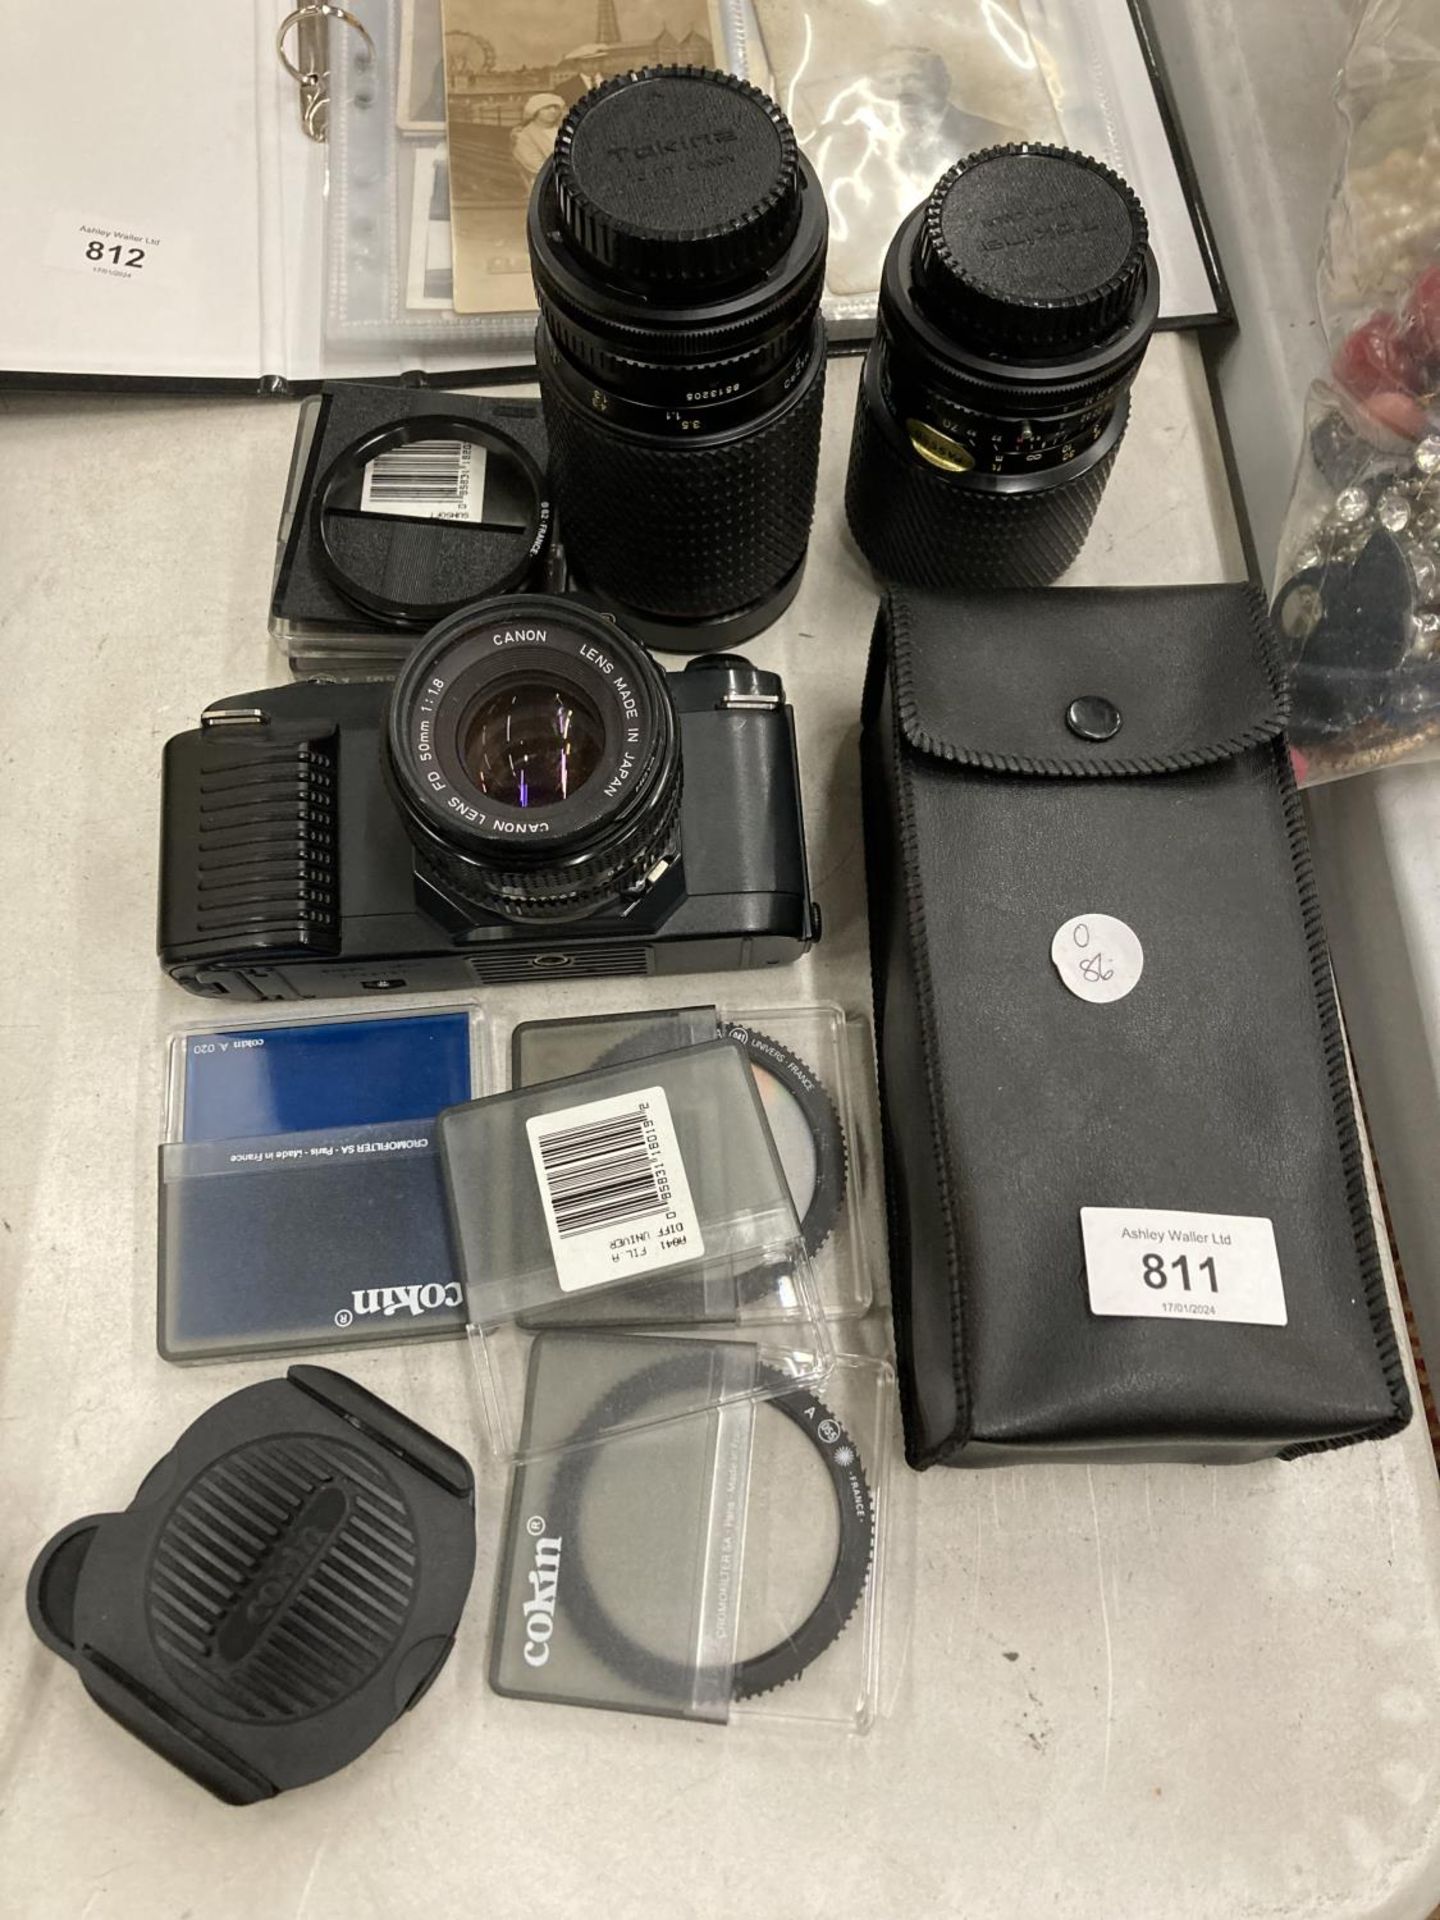 A CANON T50 CAMERA, 3 LENSES, ASSORTED FILTERS AND EXTRAS